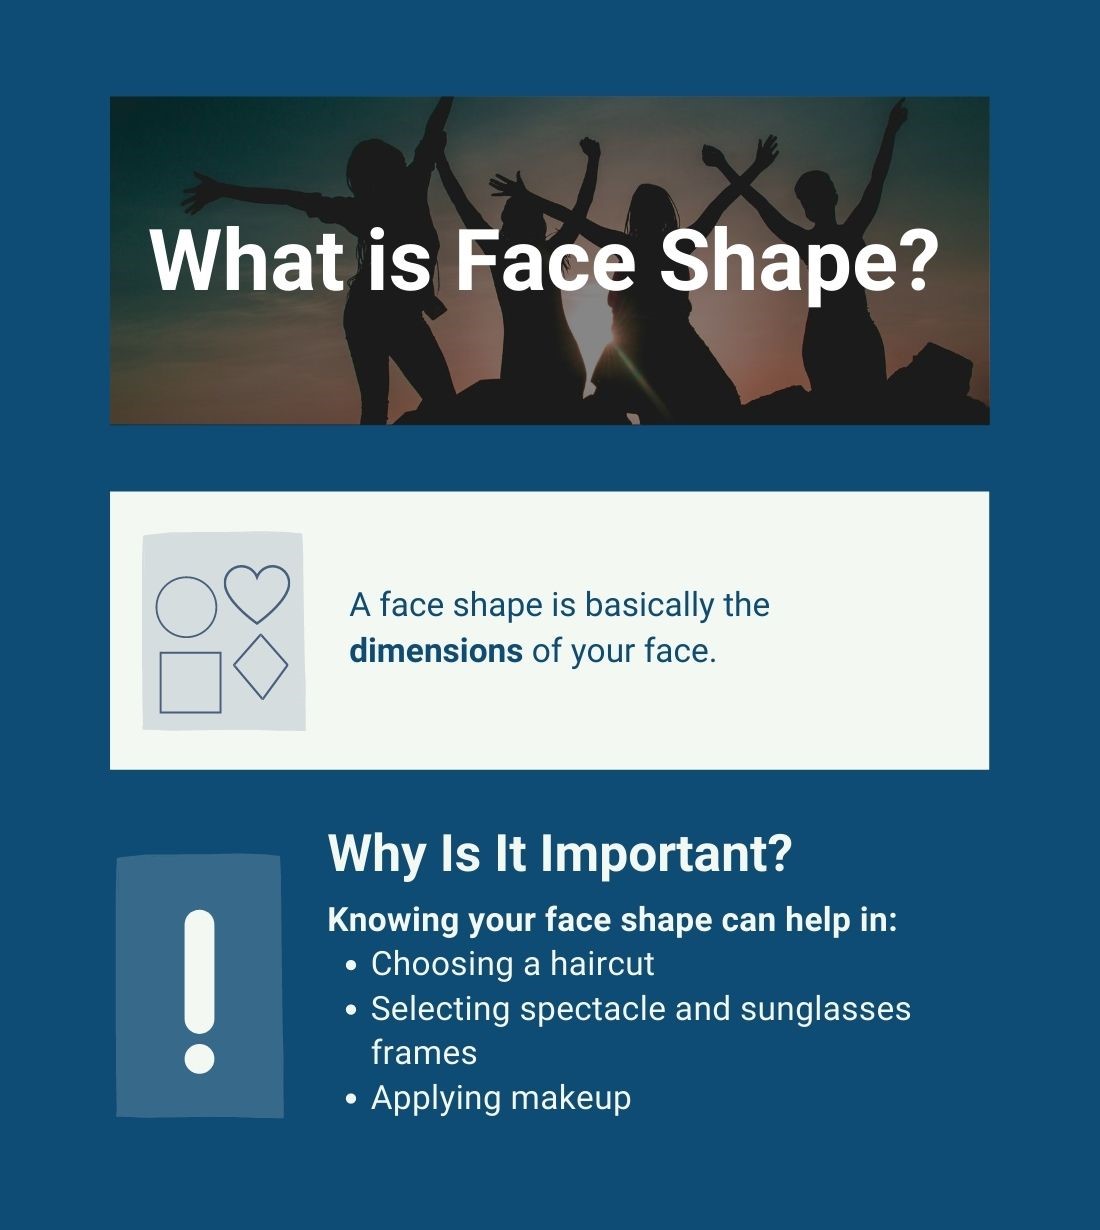 How to choose the best haircut for your face shape